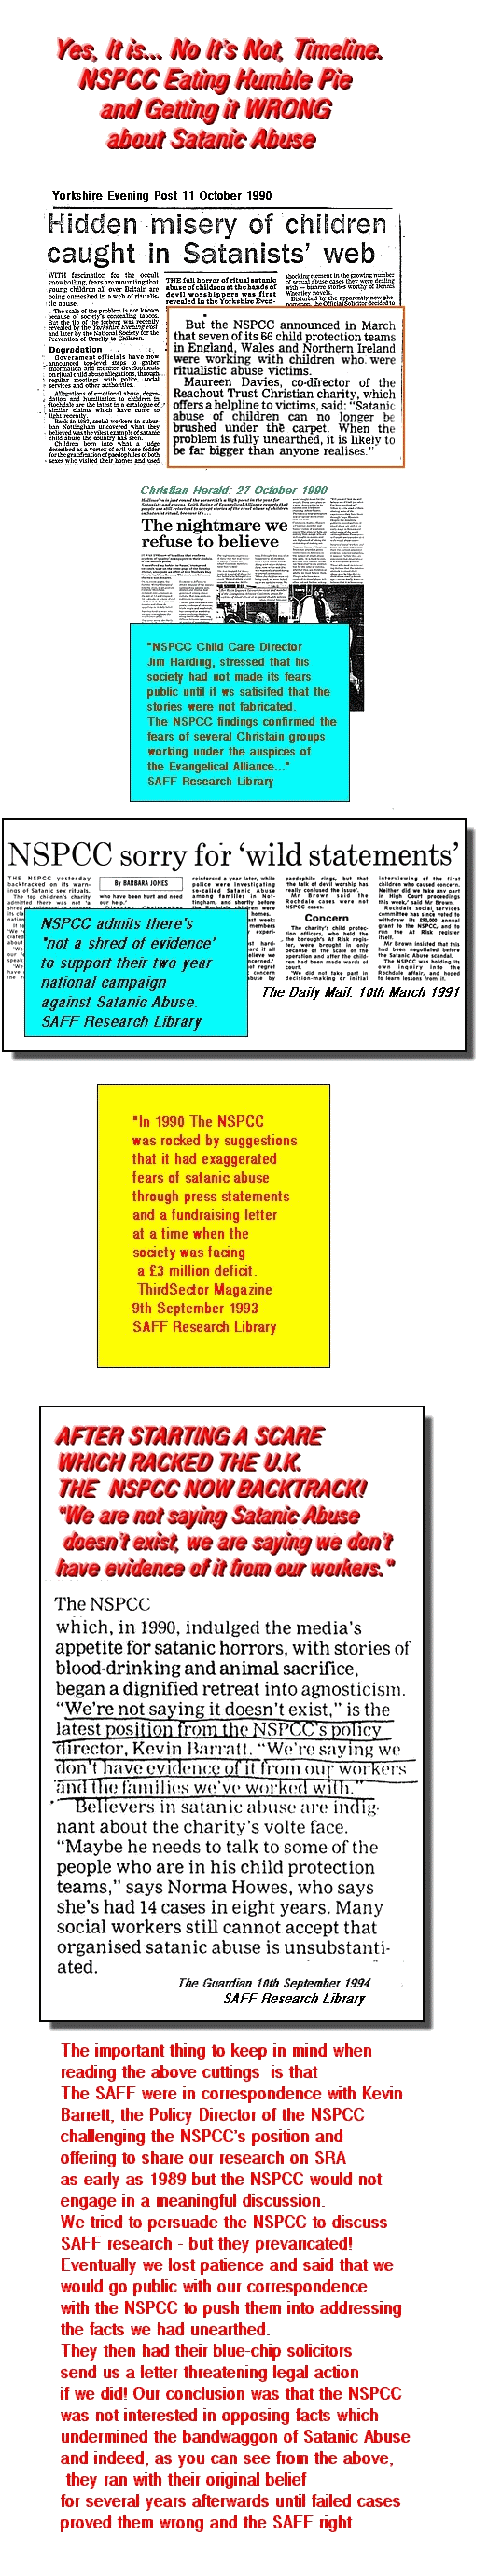 Timeline of NSPCC Scaremonering about Satanic Ritual Child Abuse